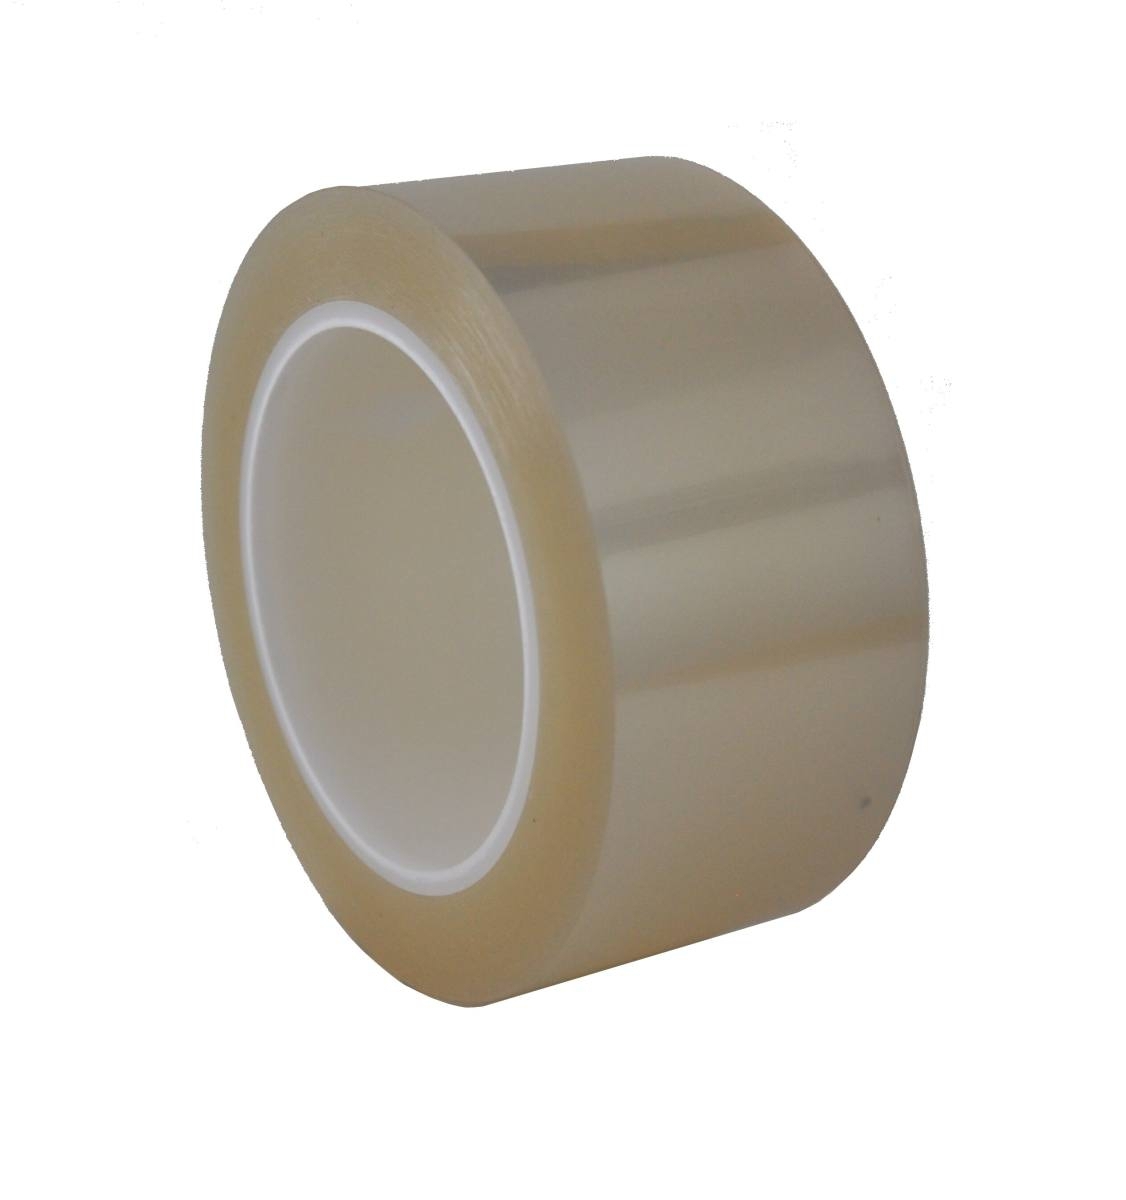 SKS fluorosilicone film, polyester film 0.075mm, 500mmx100m, coated on one side with fluorosilicone, transparent